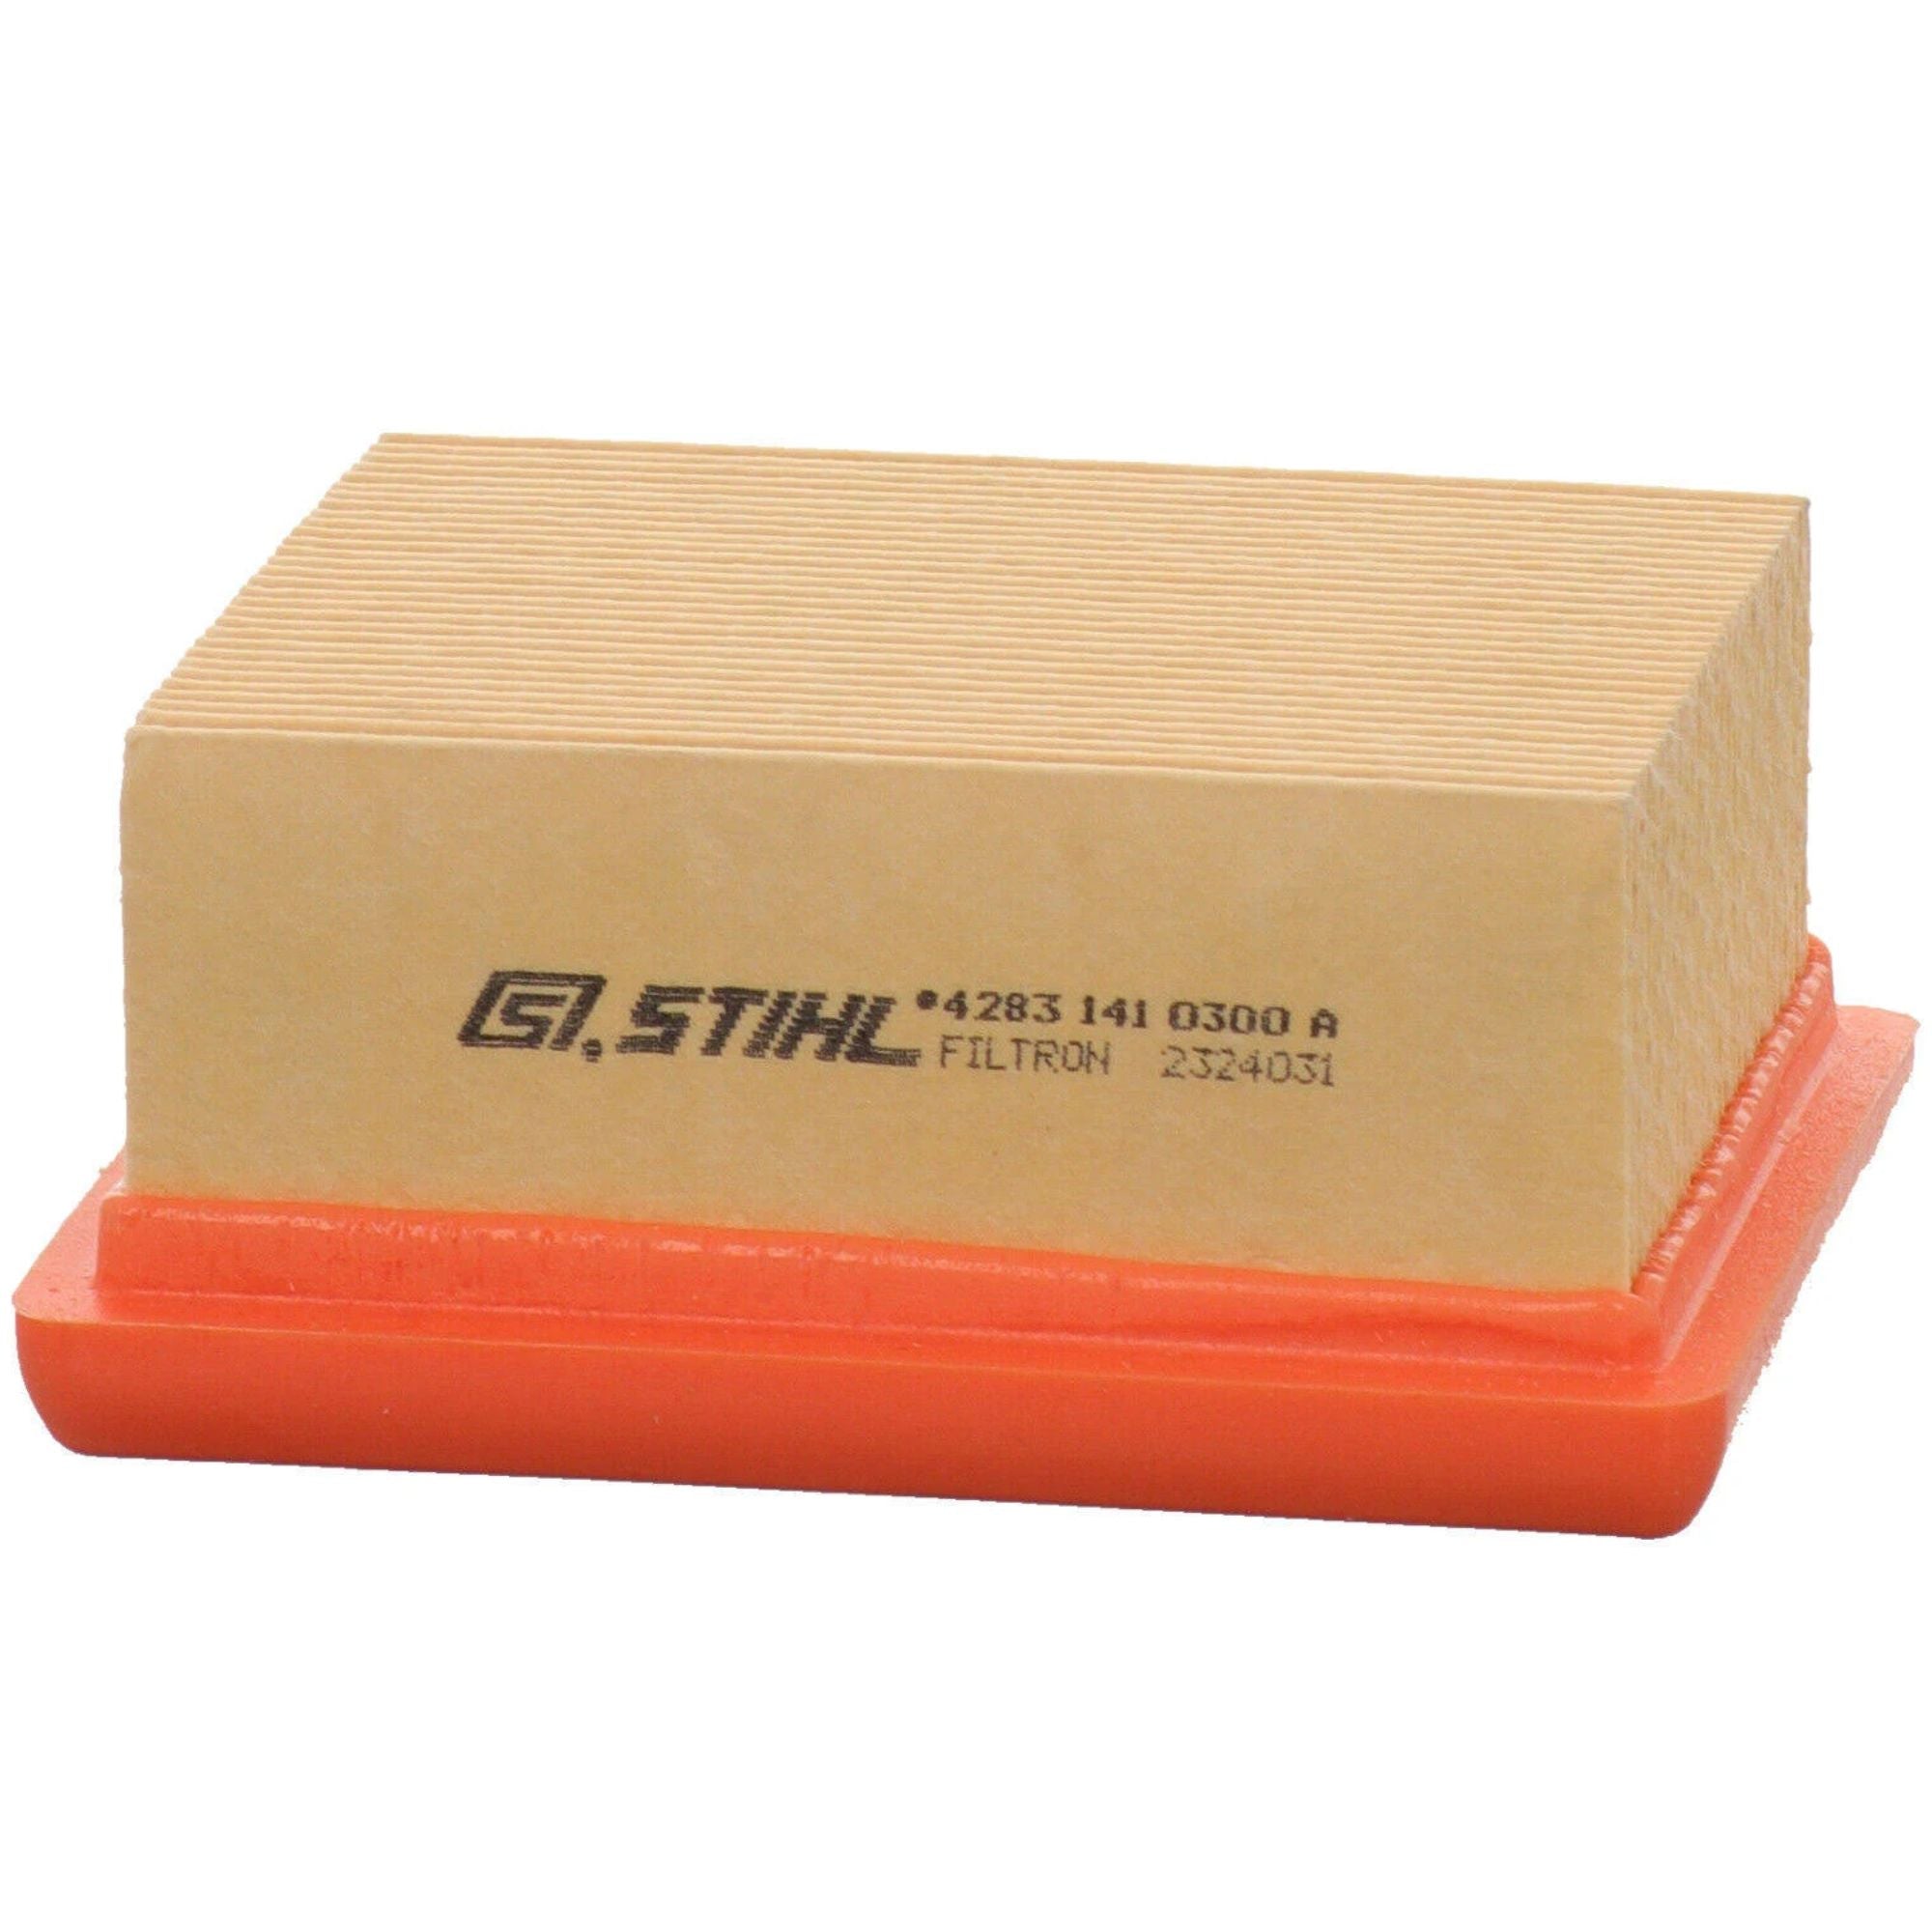 STIHL Air Filter for BR800 | 4283 141 0300